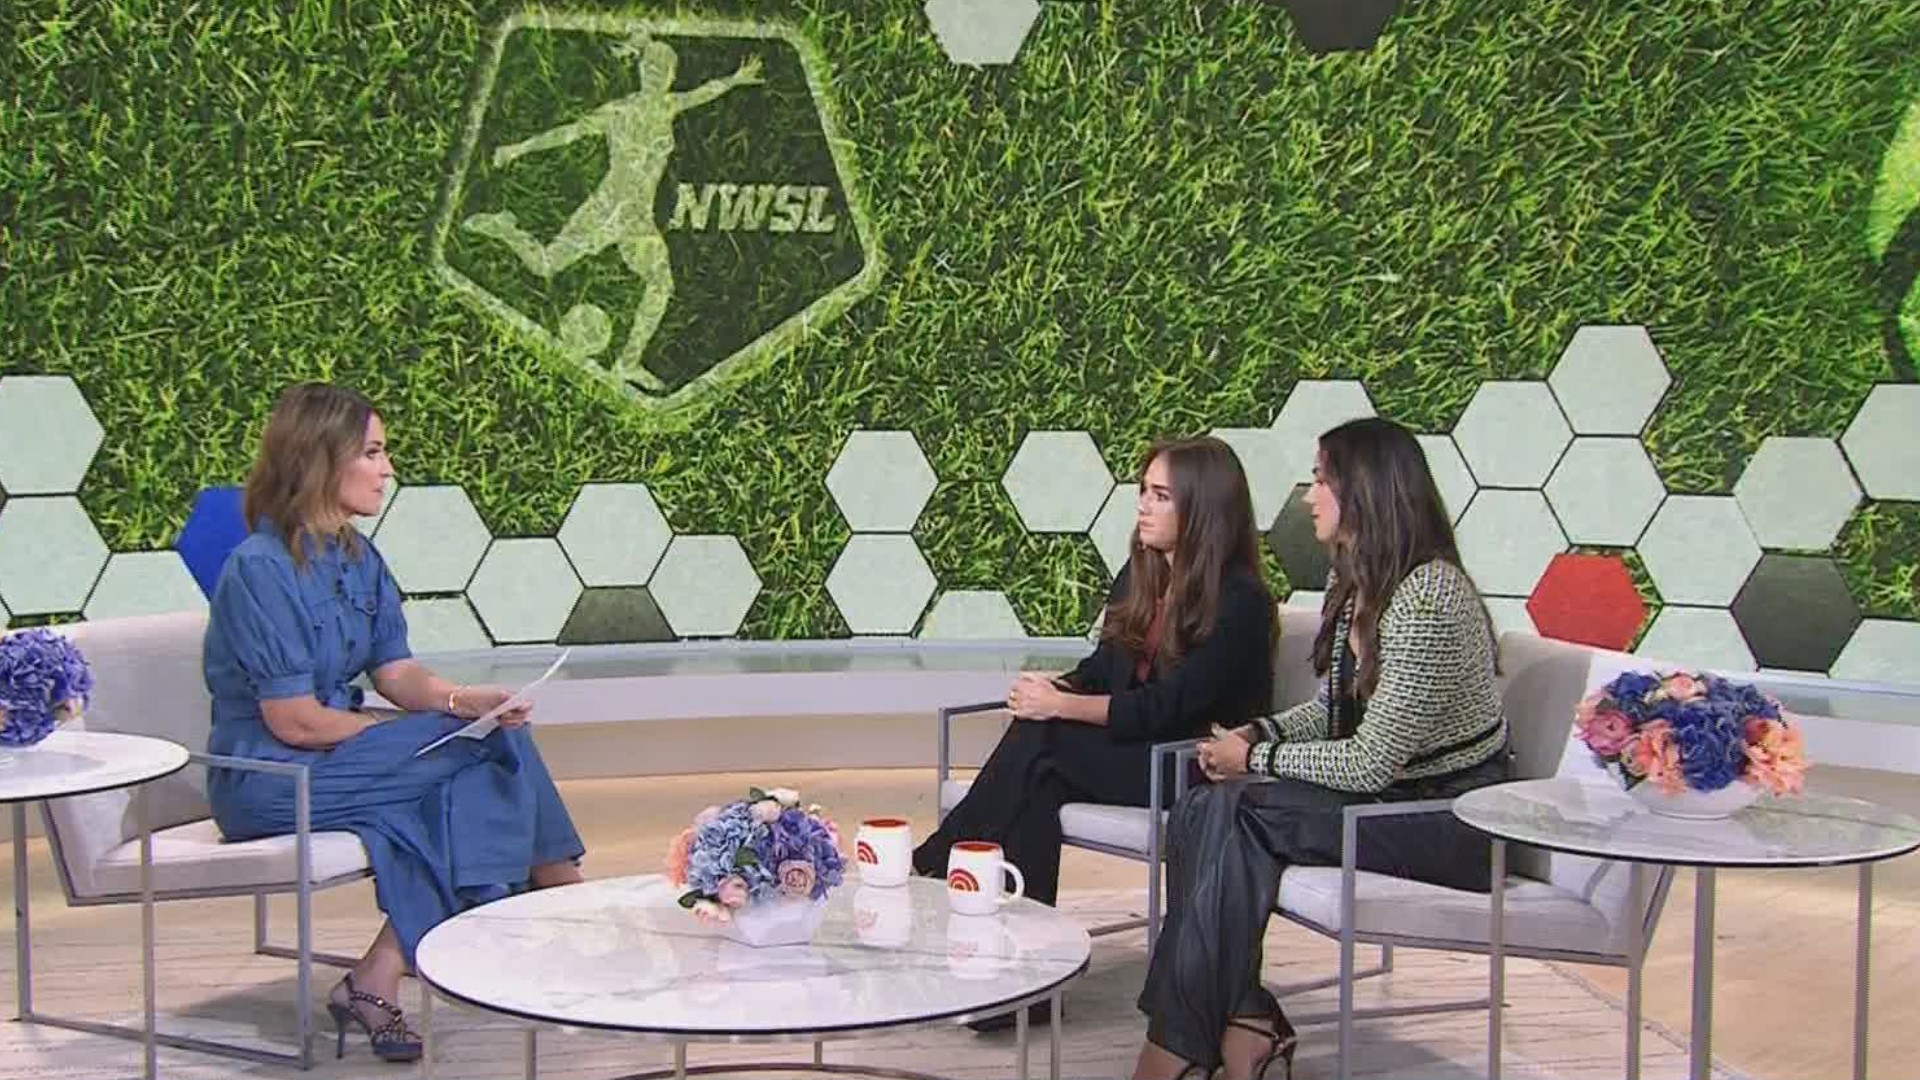 Former NWSL players Meleana "Mana" Shim and Sinead Farrelly told Savannah Guthrie the league failed to protect its players.